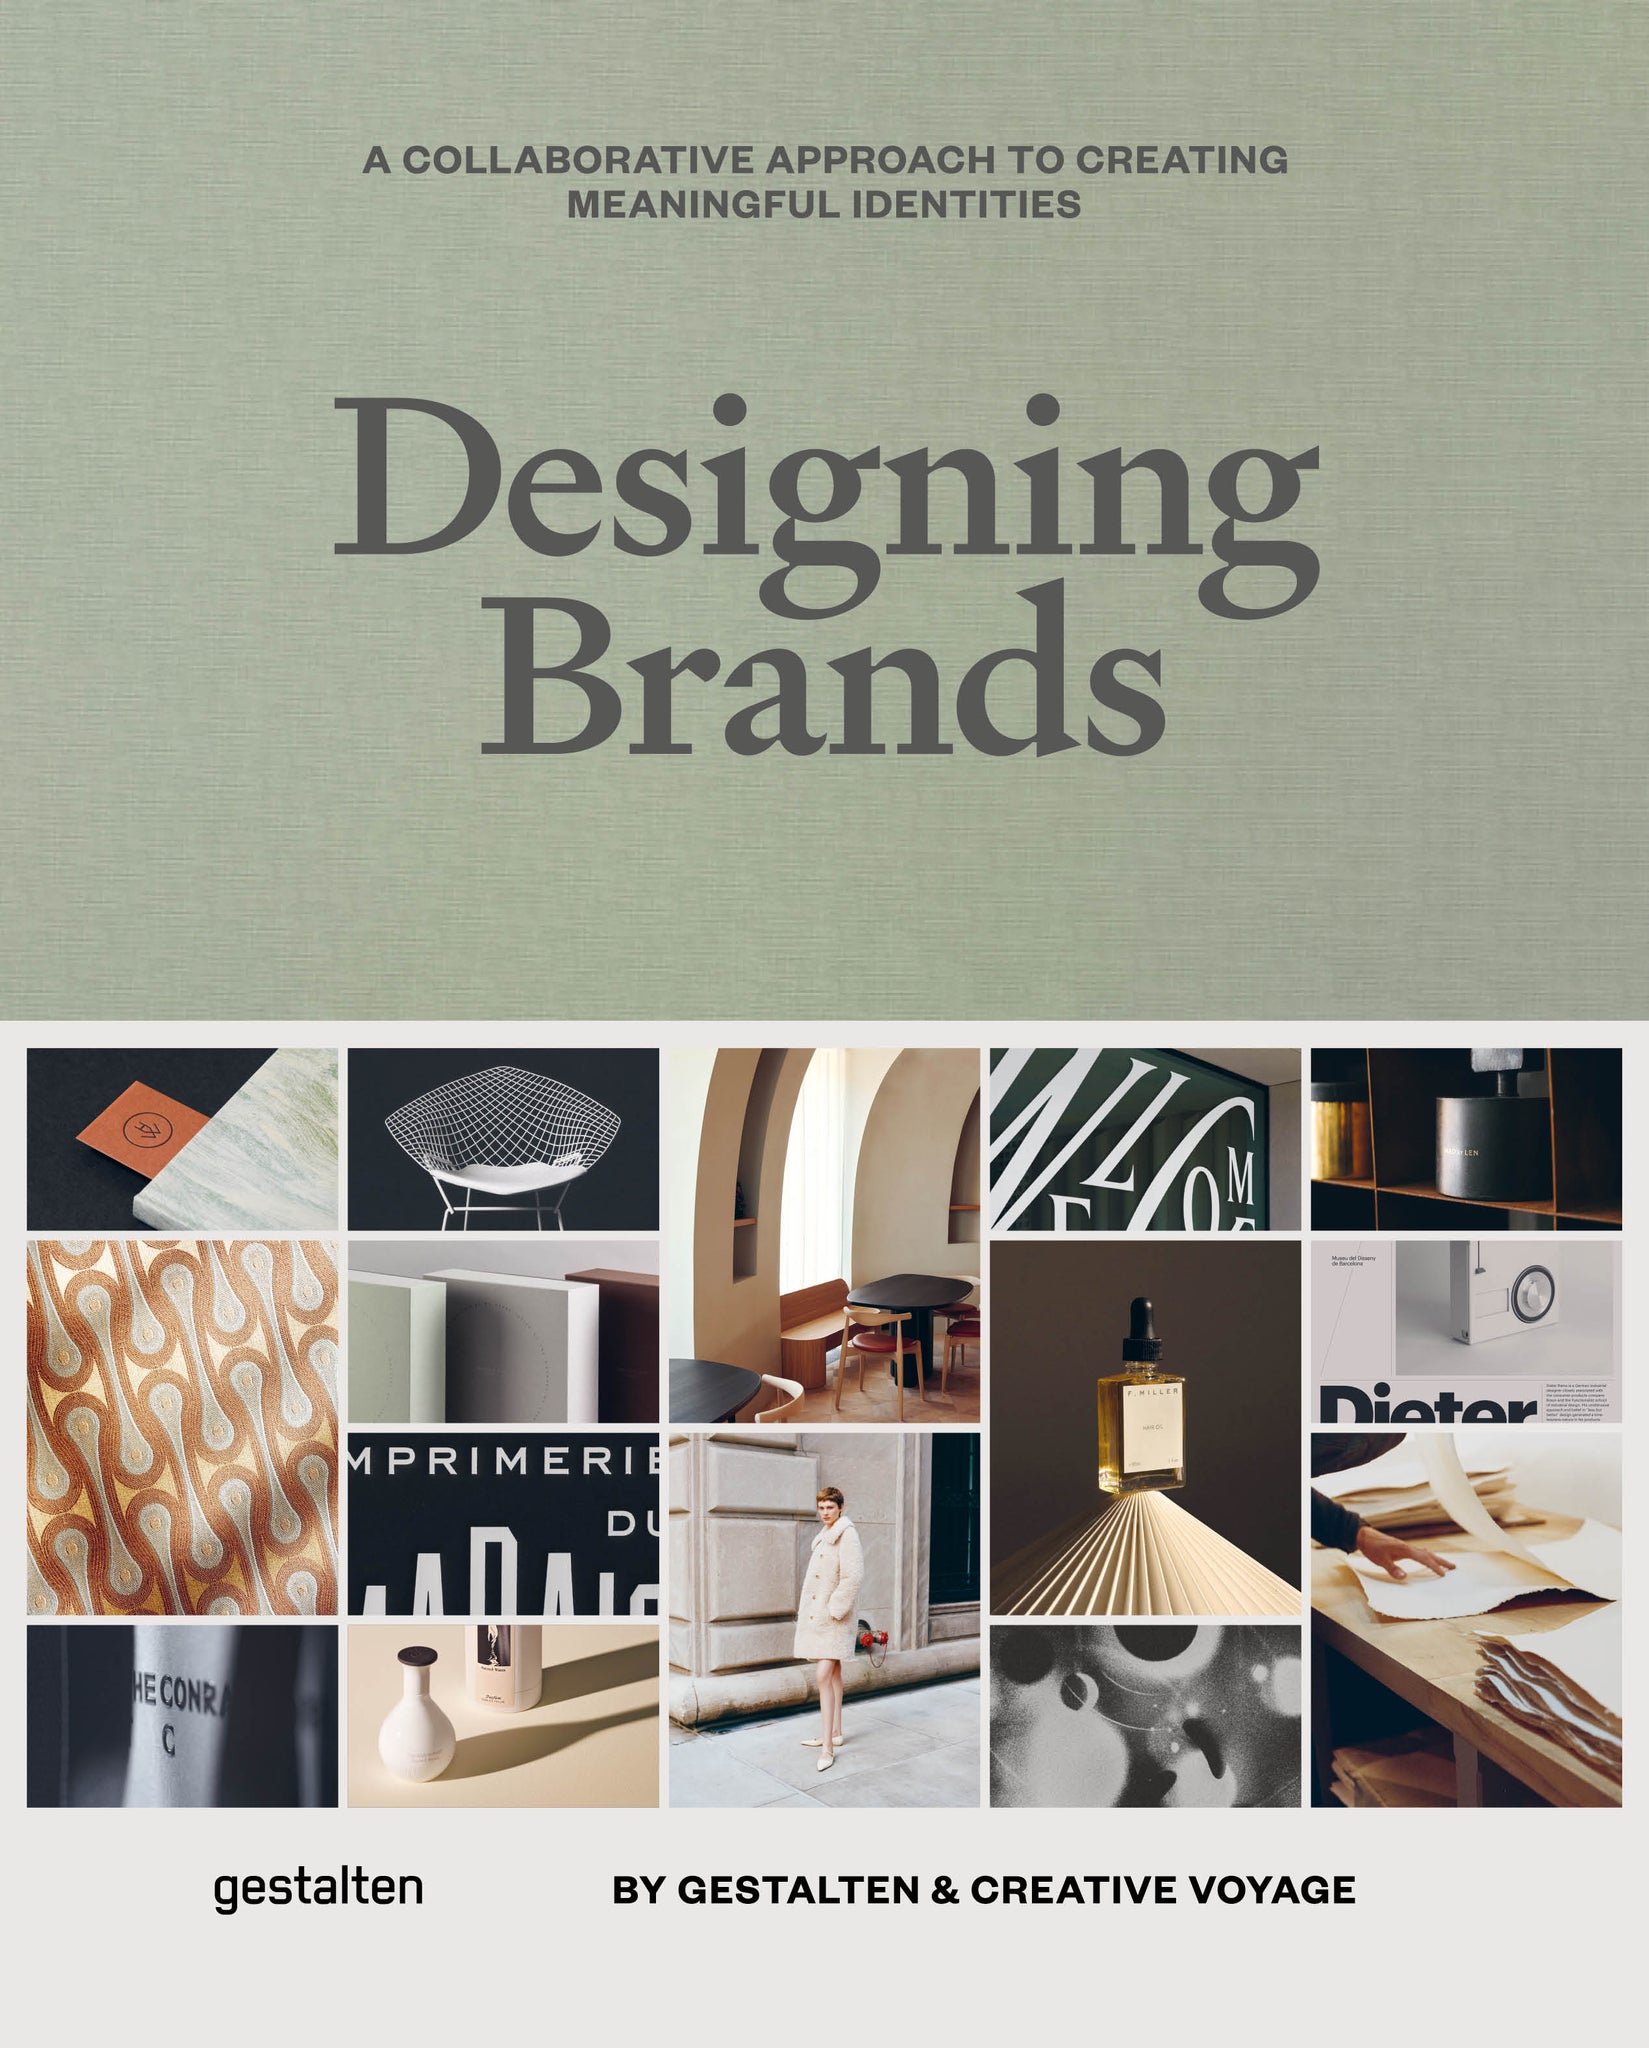 Designing Brands (announced as Multiply) cover